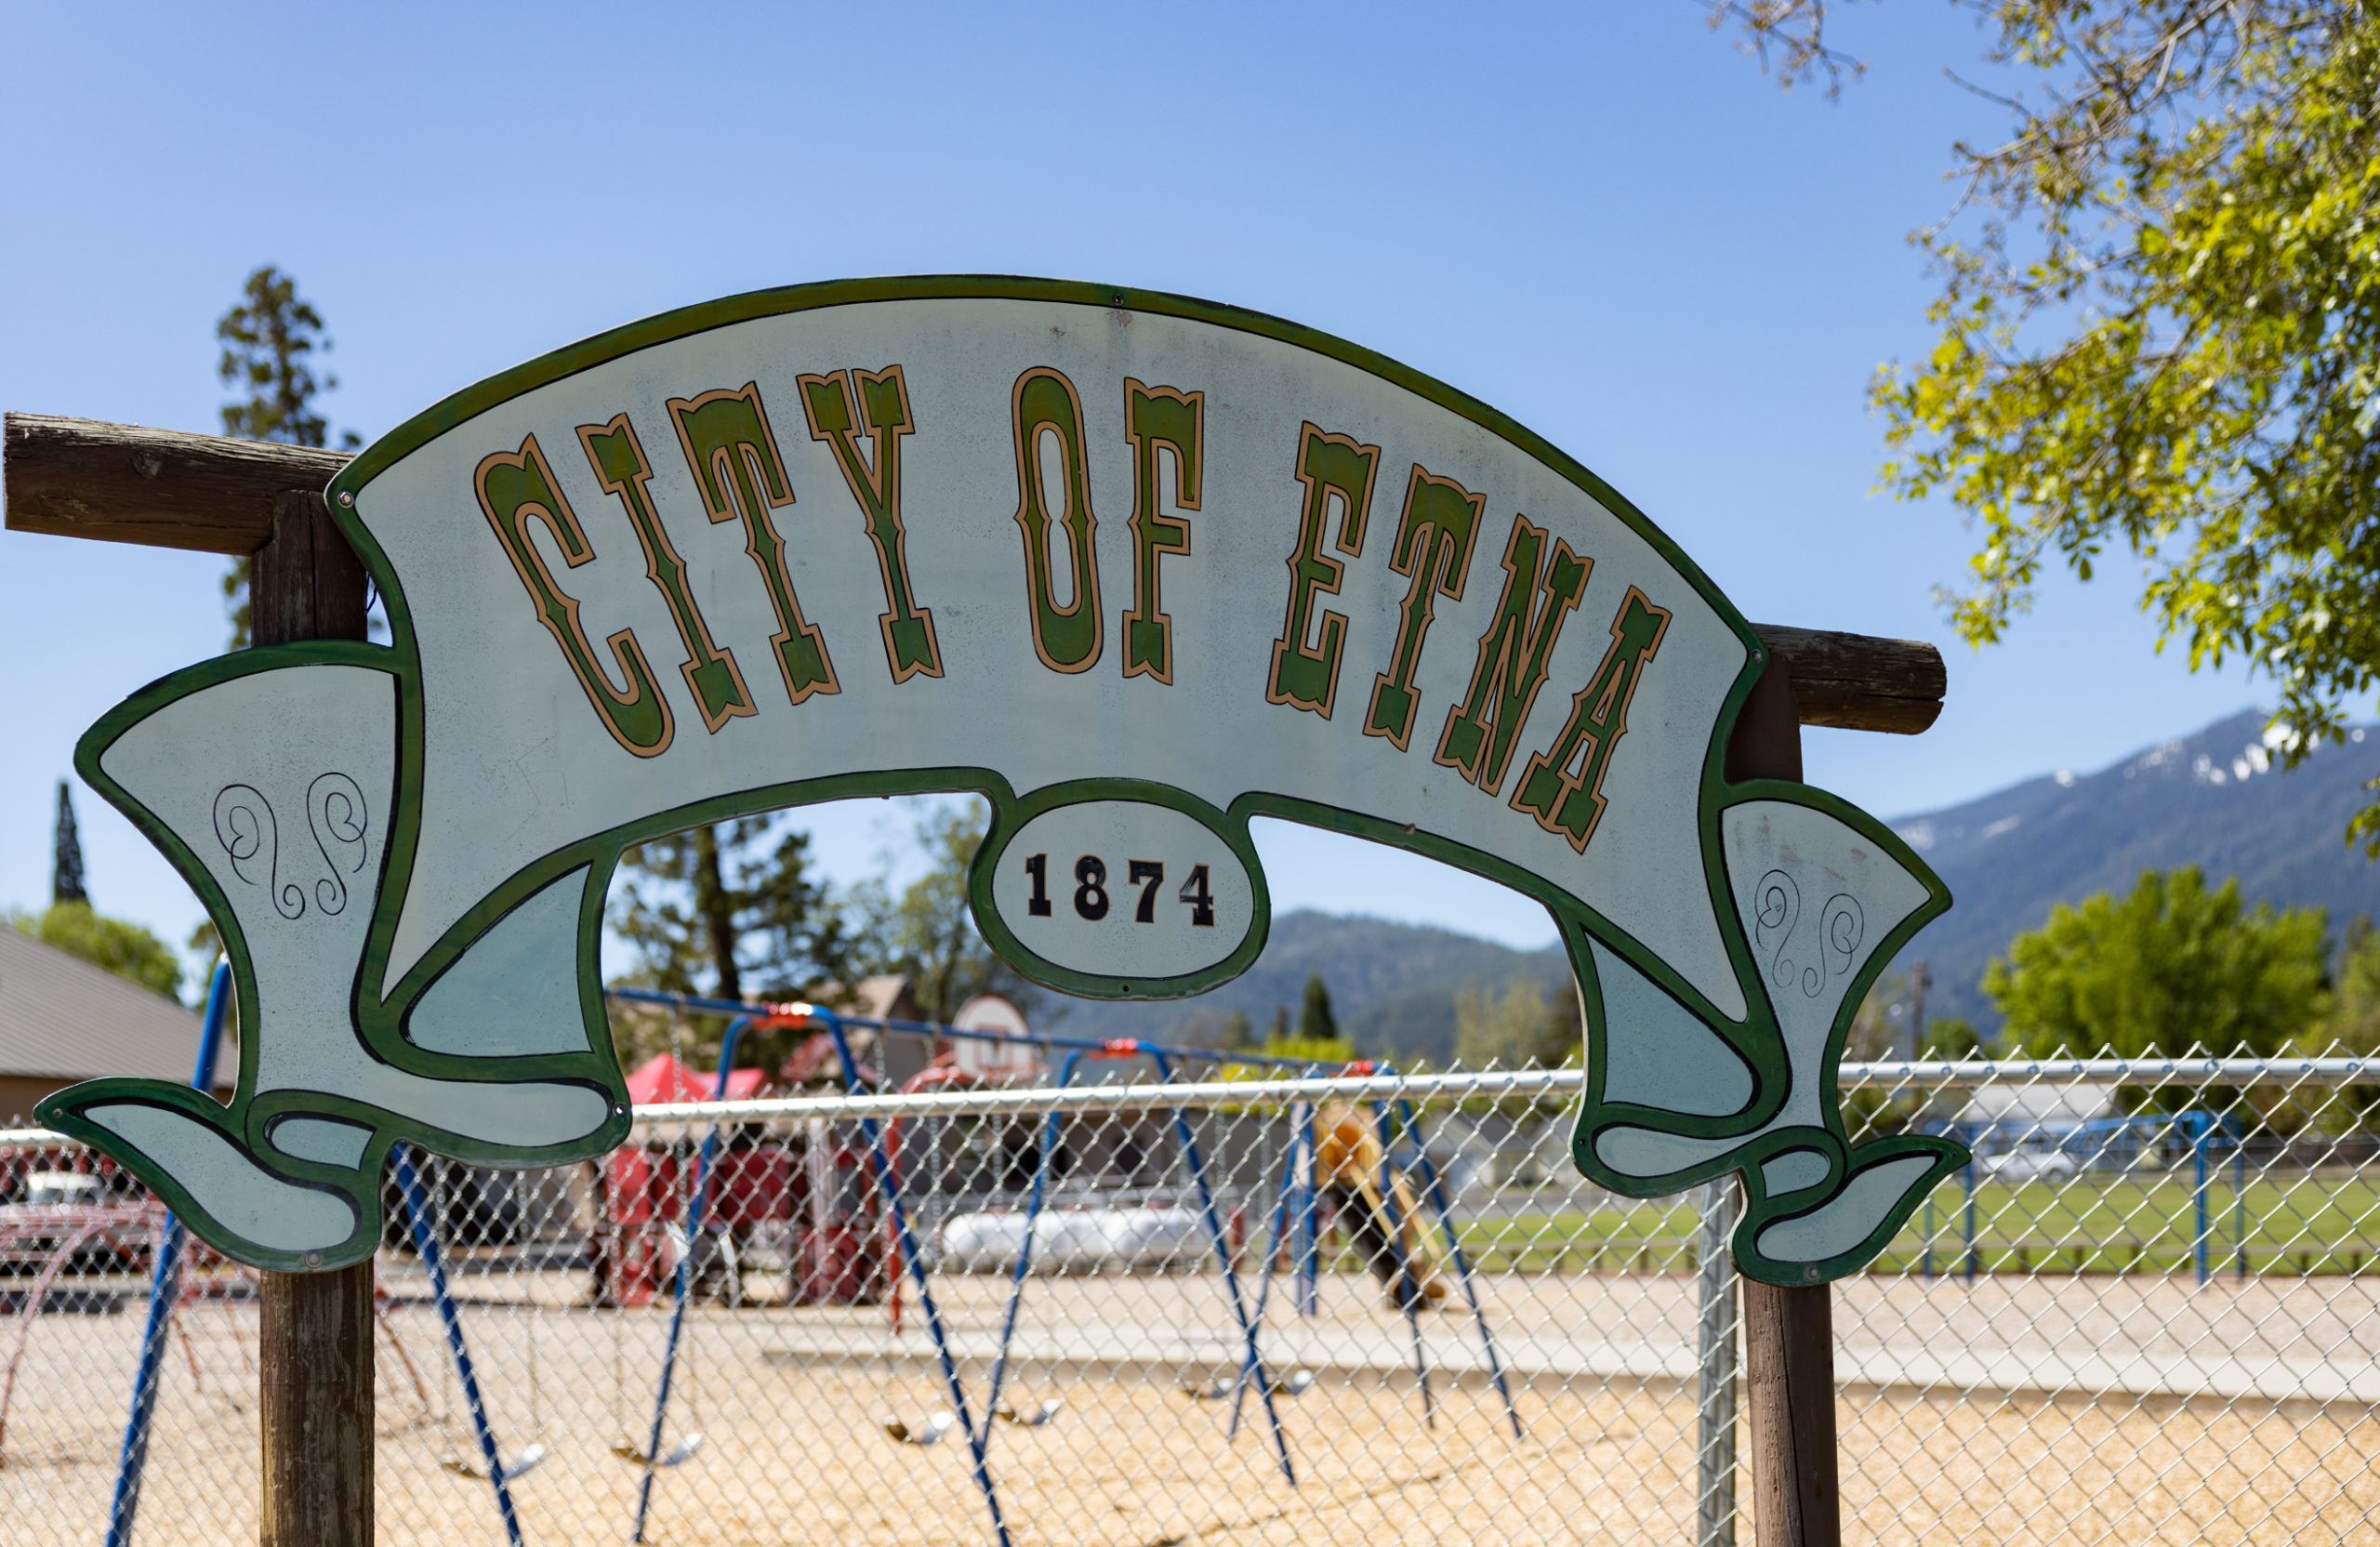 Off the beaten path in the City of Etna, California established in 1874 sign